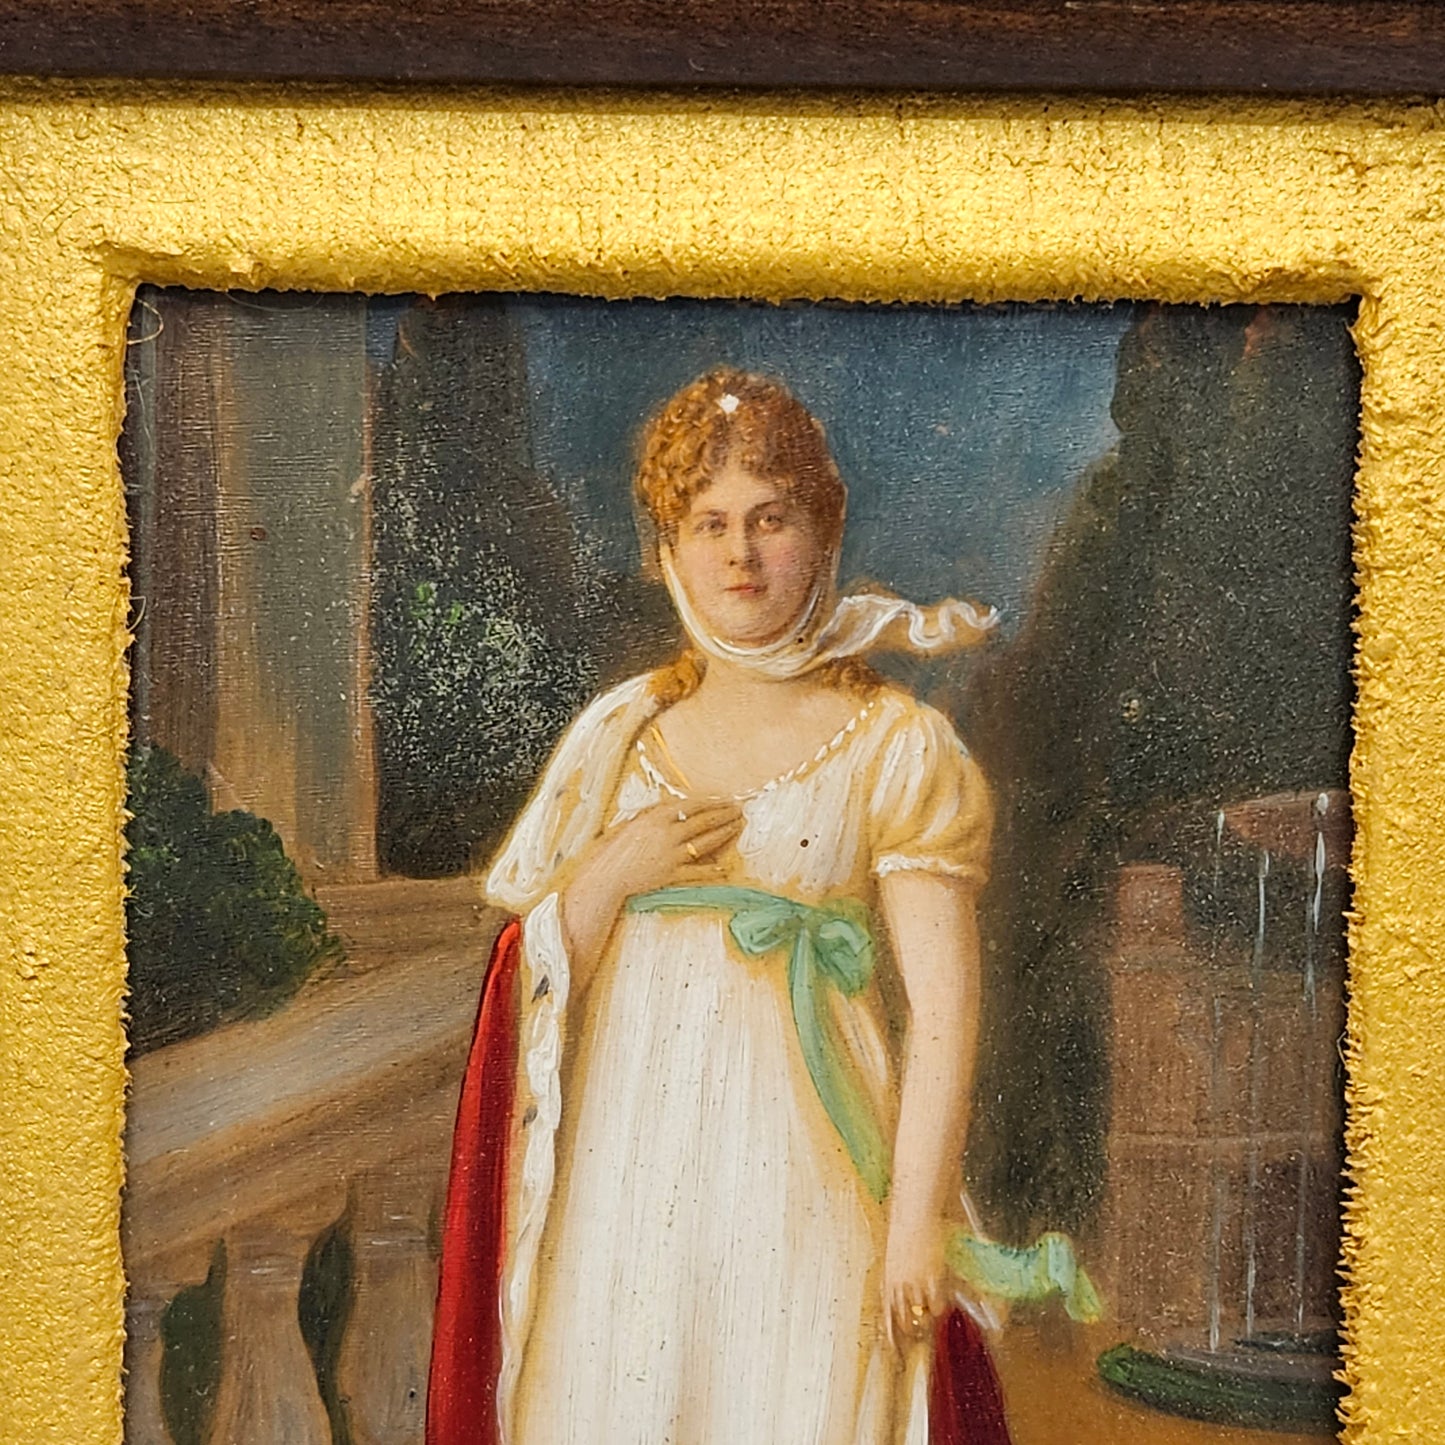 Painted Print on Board of Queen Louise of Prussia